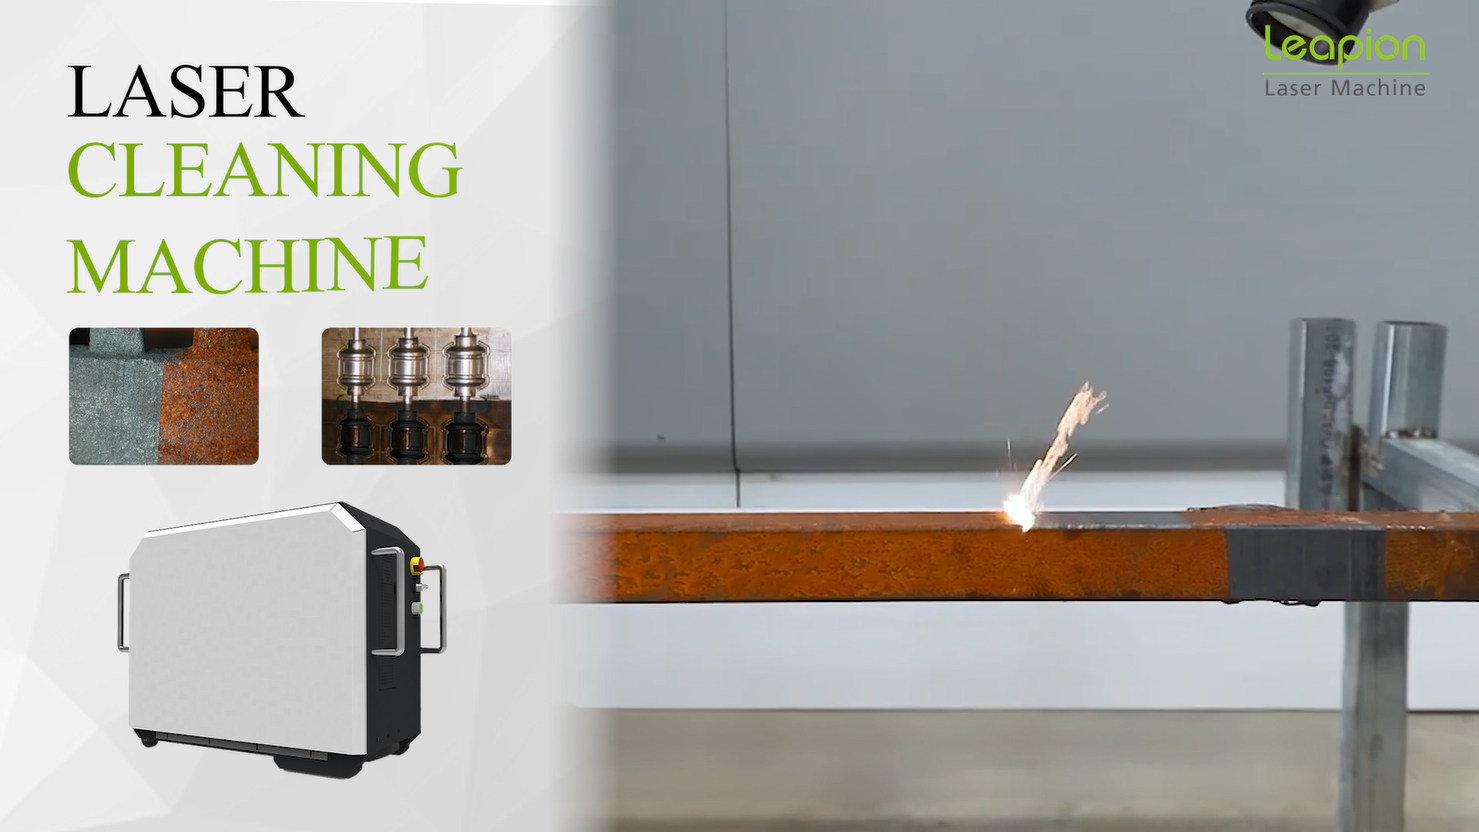 Leapion LCL portable Fiber laser cleaning machine with small size & quickly cleaning